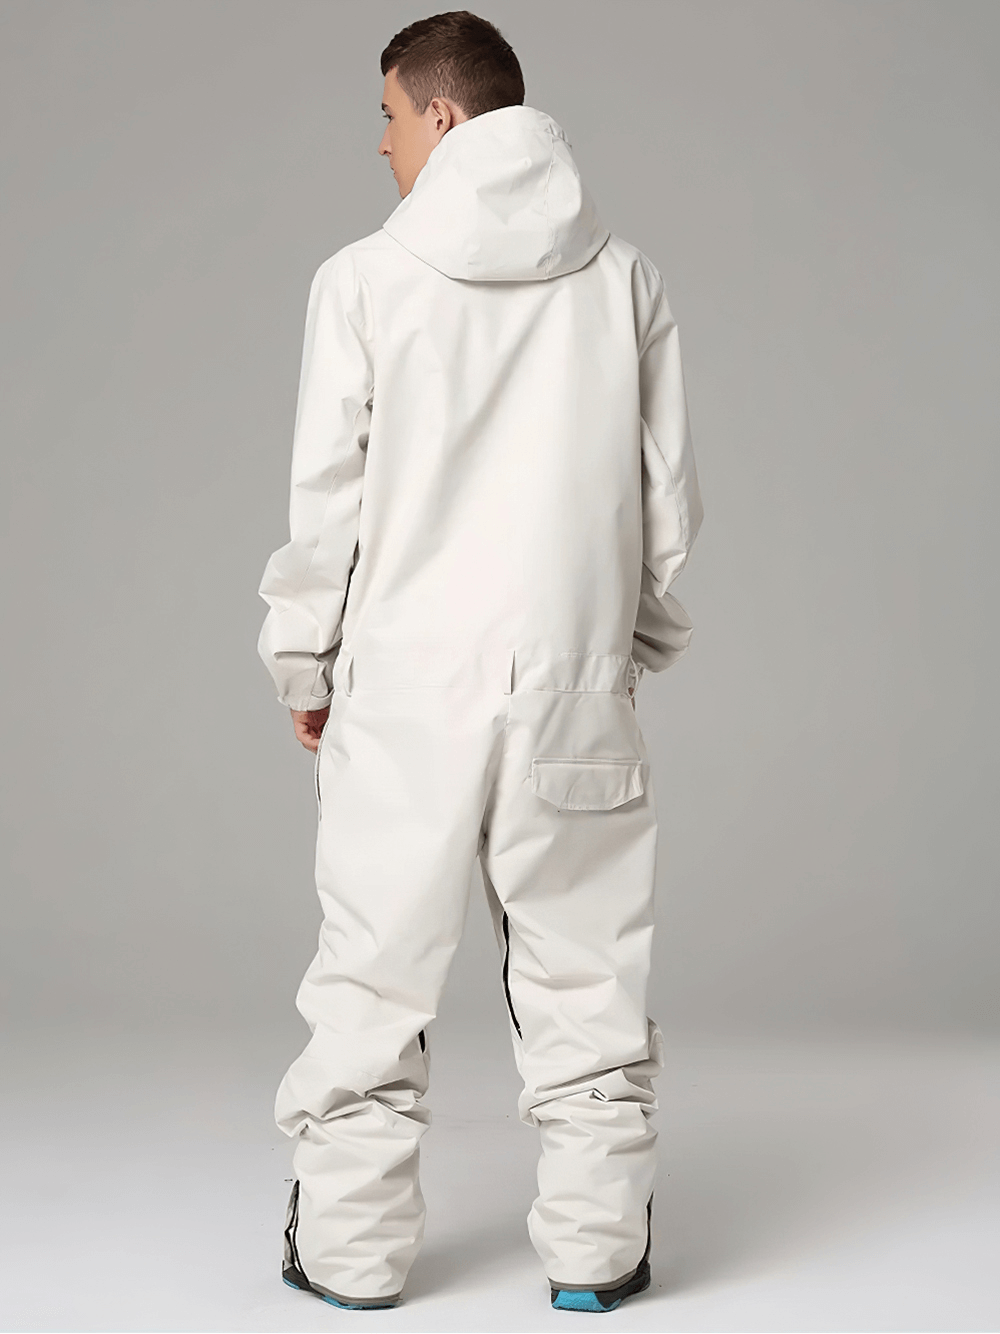 Stylish Male Hooded Snowsuit for Skiing Adventures - SF2048